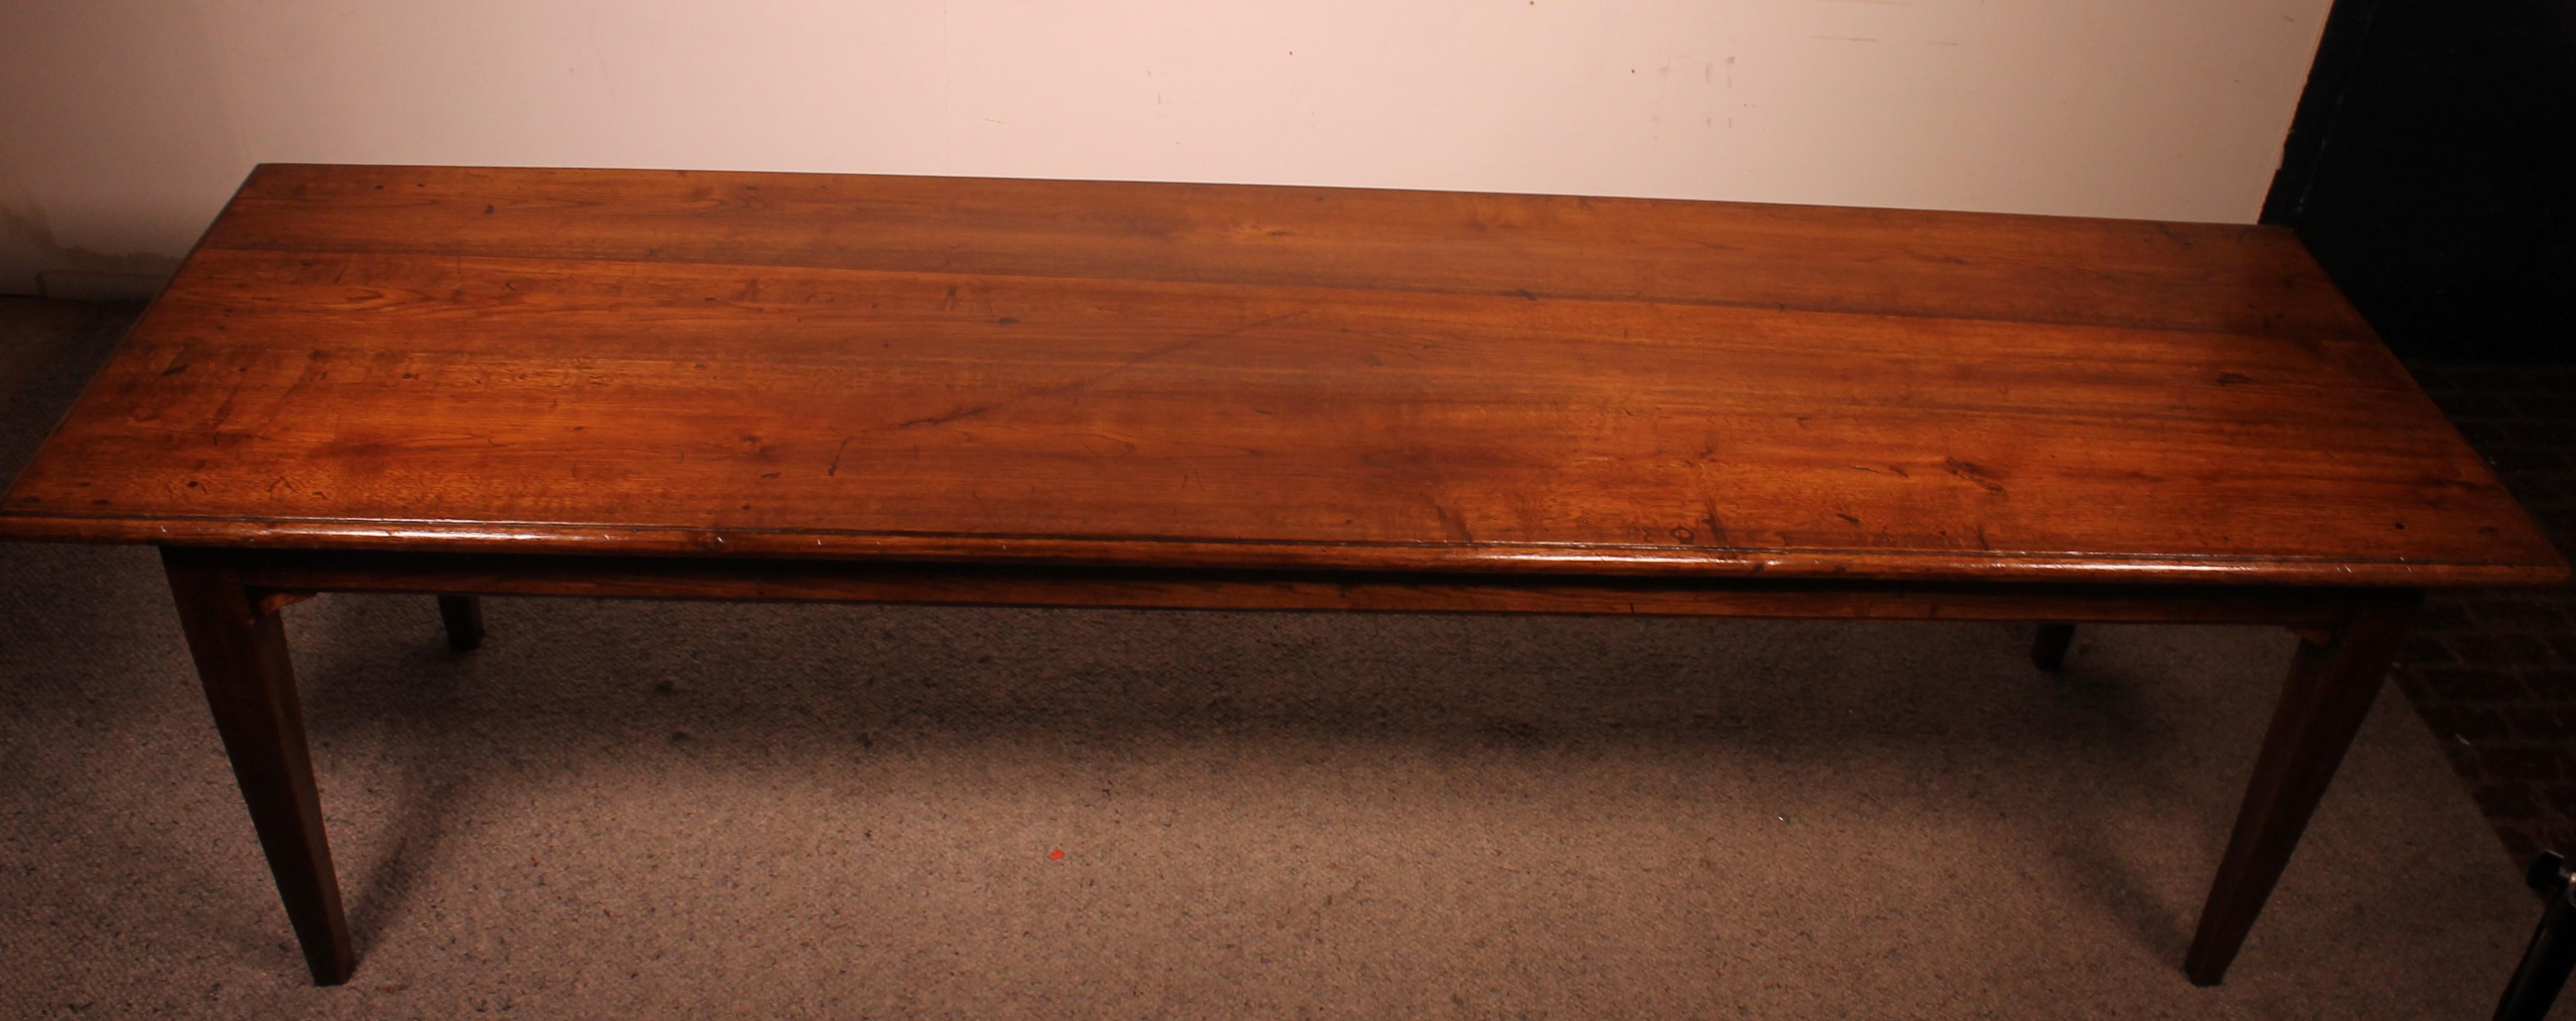 Refectory Table of Oak - 19th Century For Sale 6